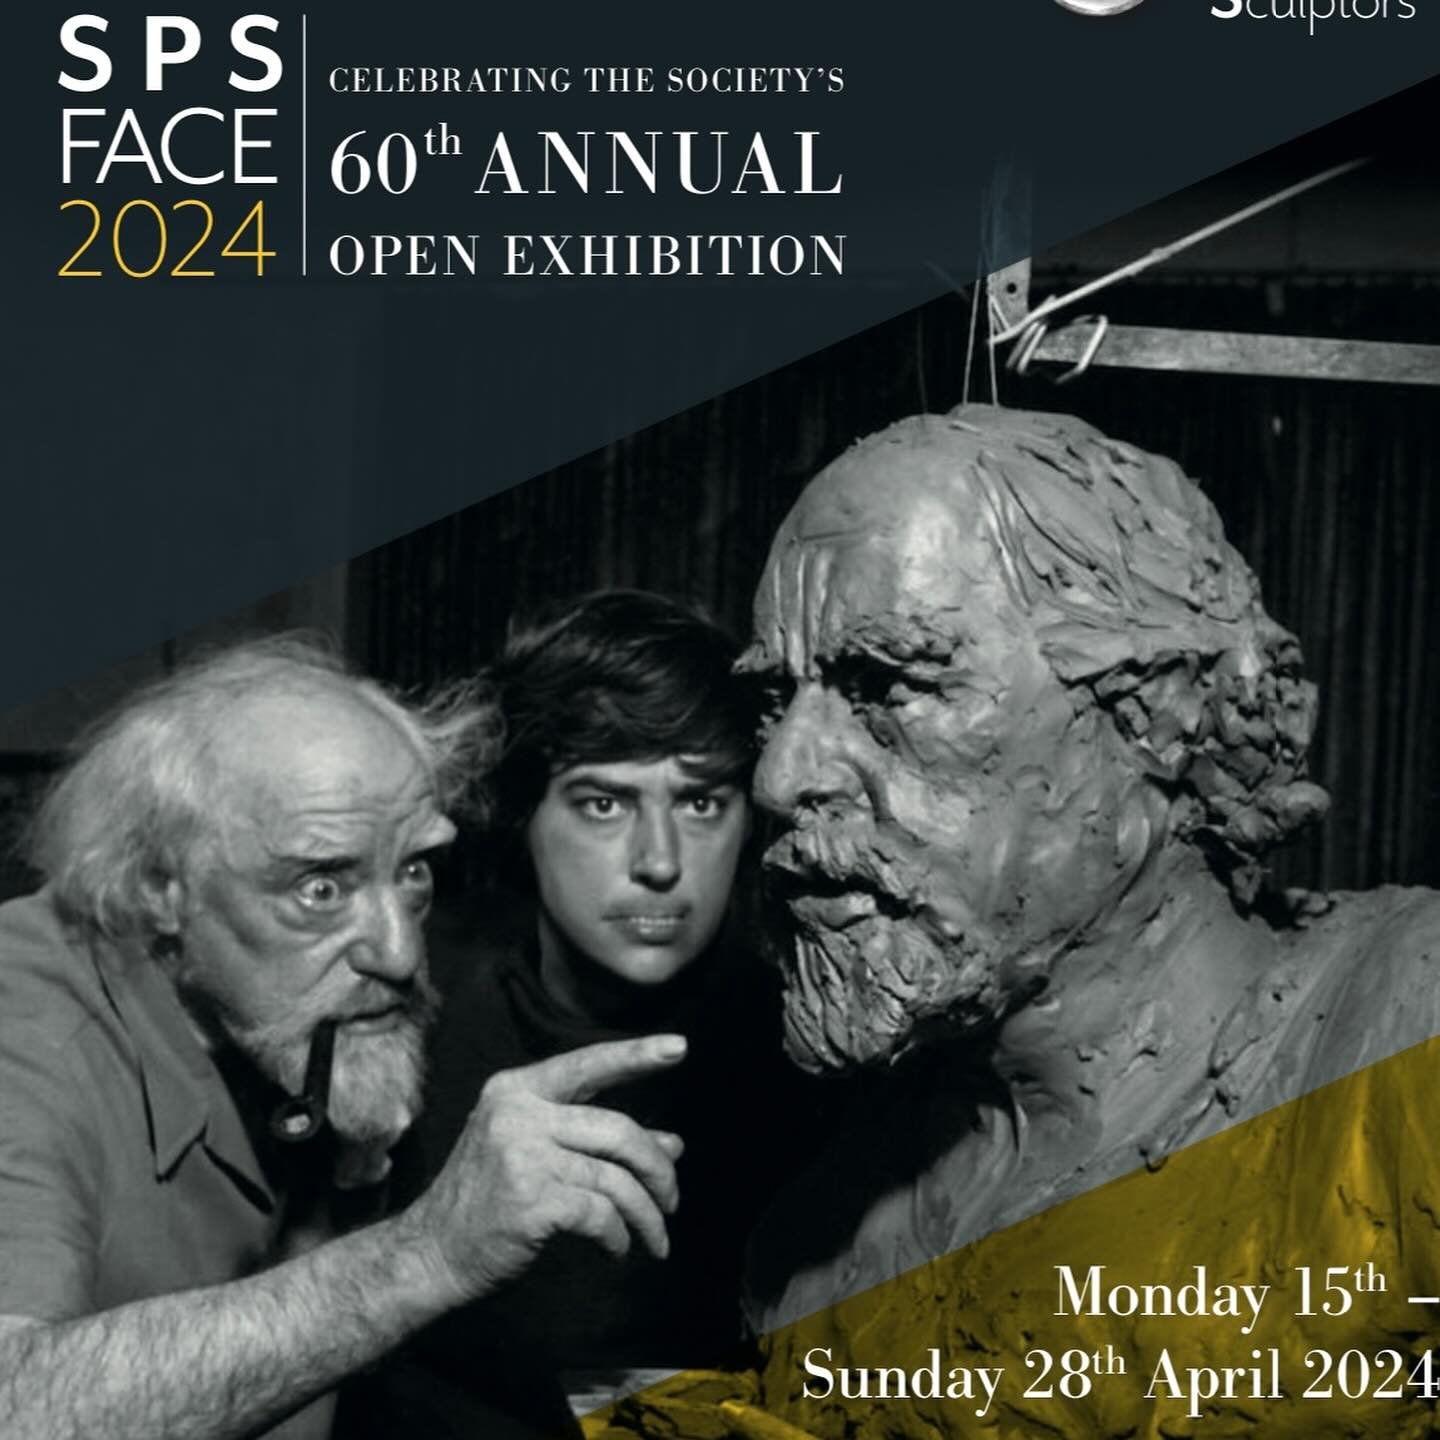 So happy to be part of the #societyofportraitsculptors 60th annual #spsface2024 exhibition

I&rsquo;m exhibiting &ldquo;A moment of equilibrium&rdquo;

The exhibition opens tomorrow and there will be an abundance of inspiring pieces, I highly recomme